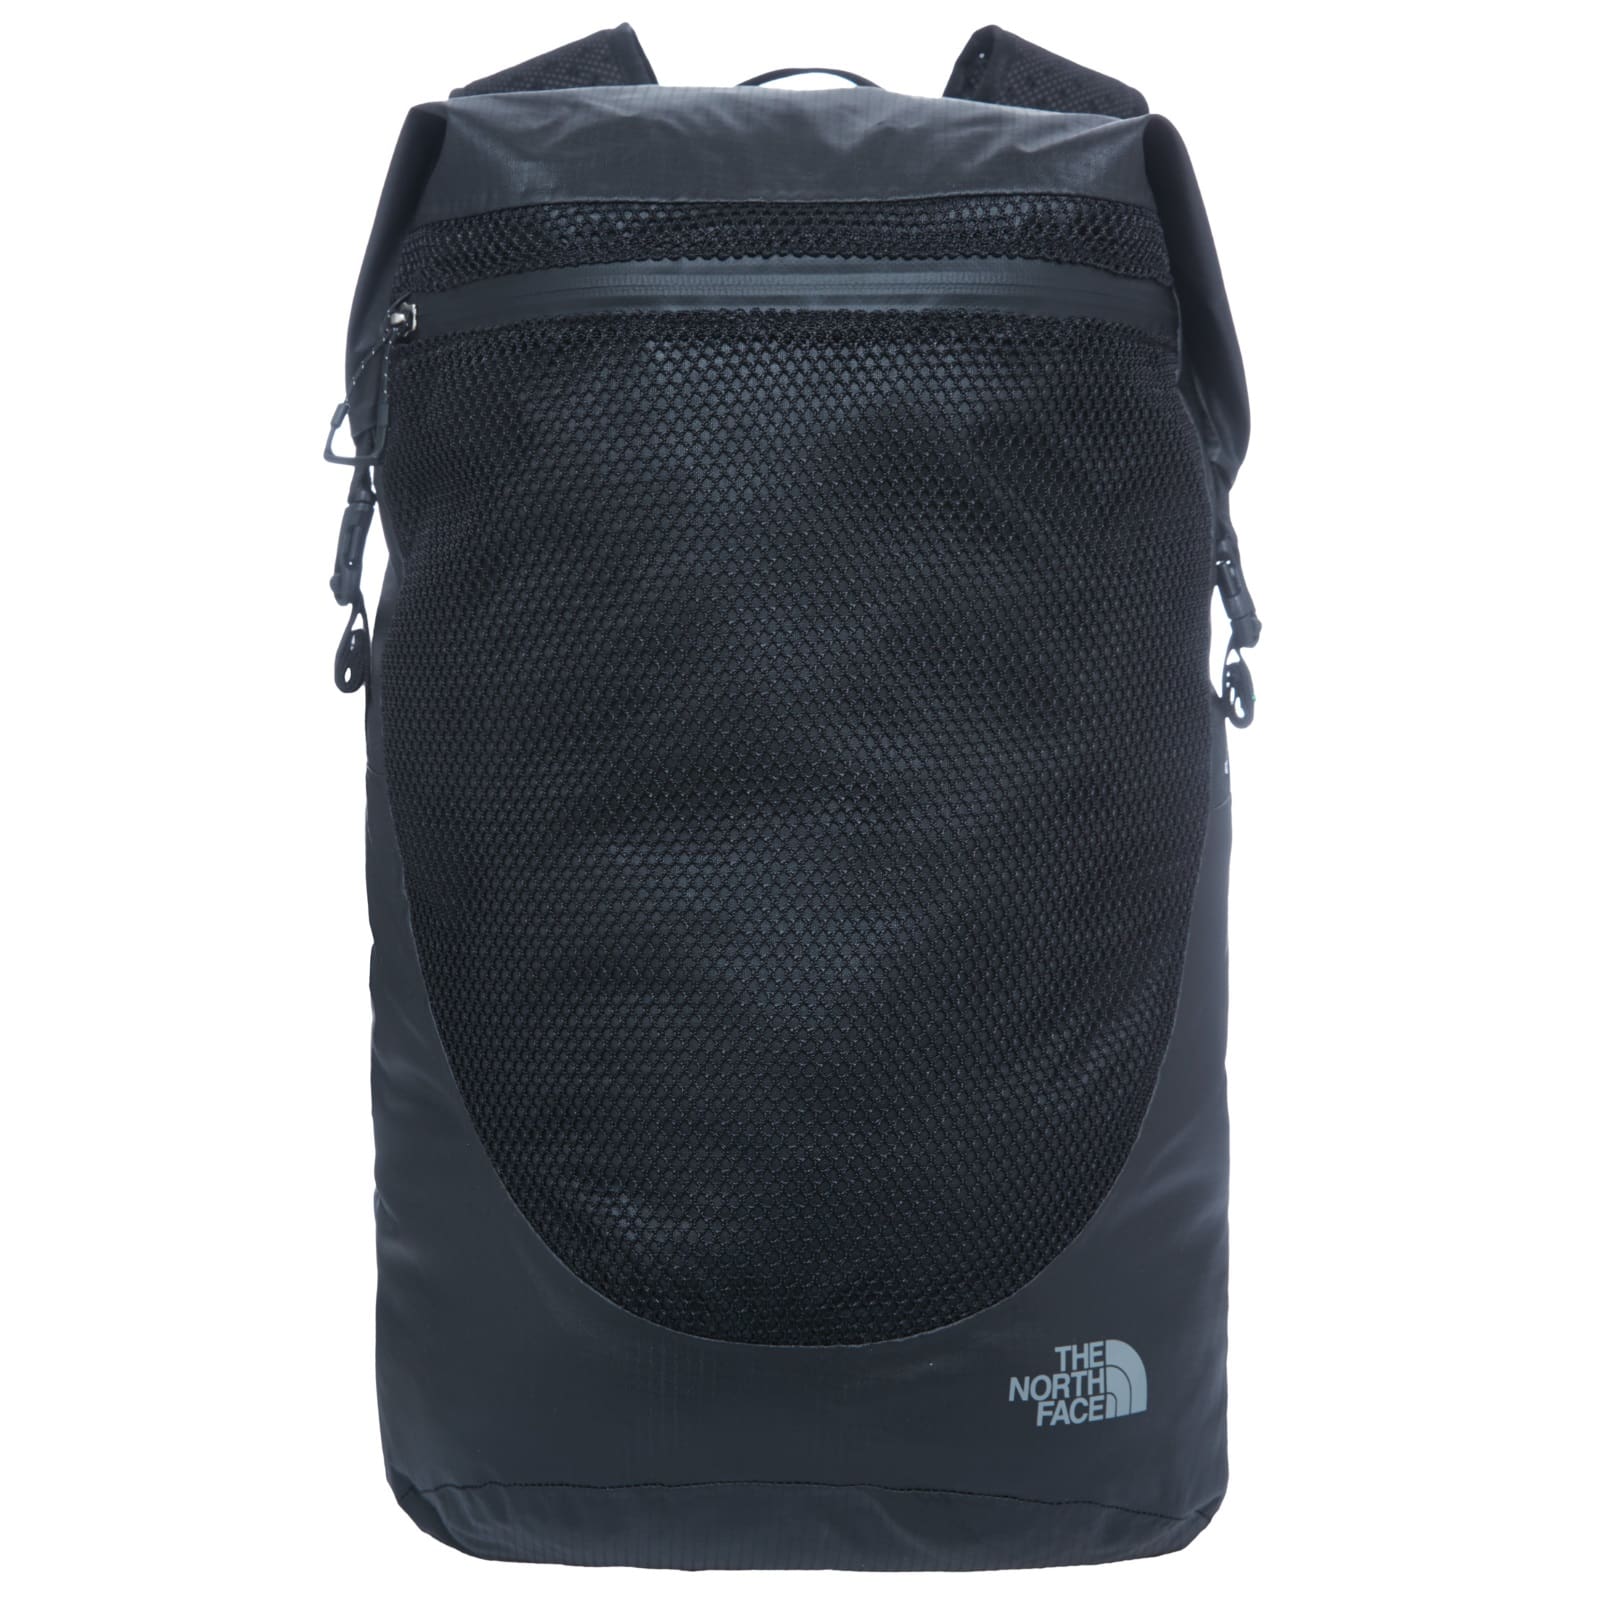 north face waterproof daypack